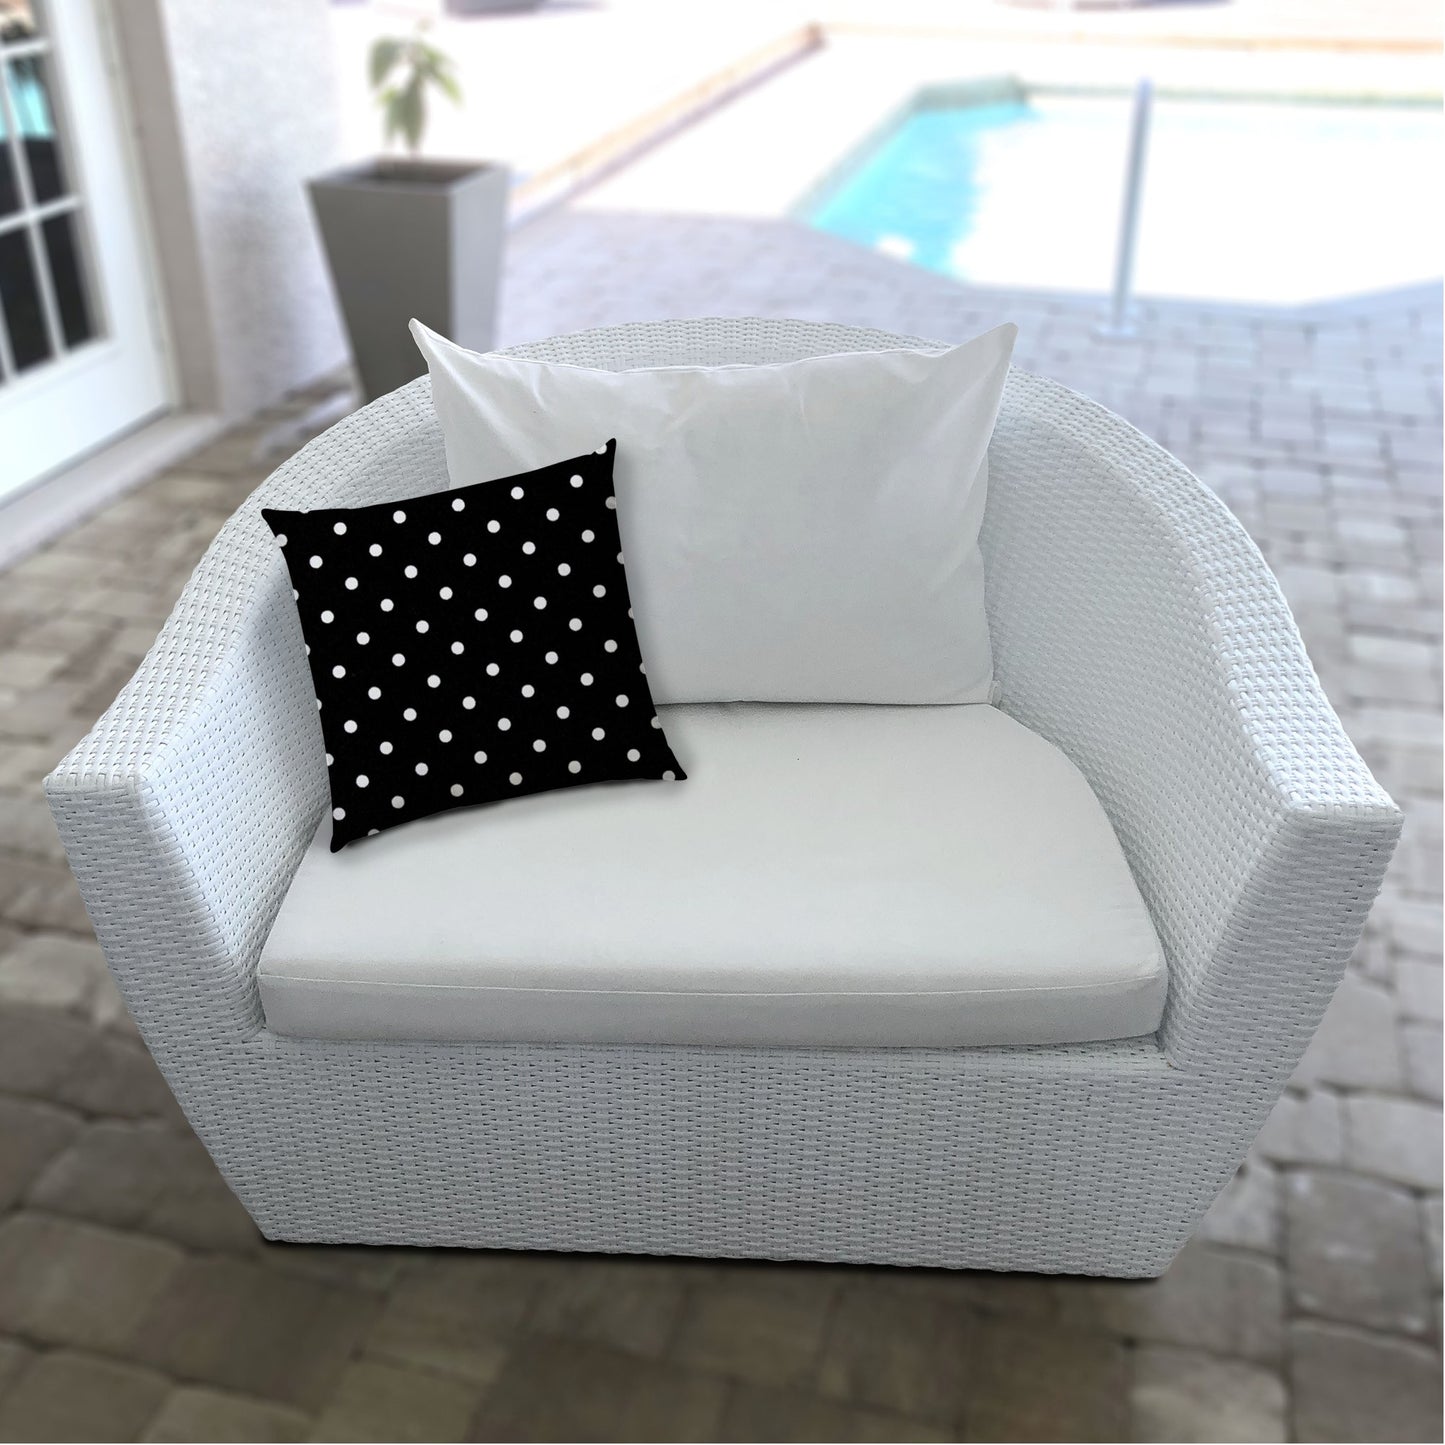 20" X 20" Black And White Blown Seam Polka Dots Throw Indoor Outdoor Pillow